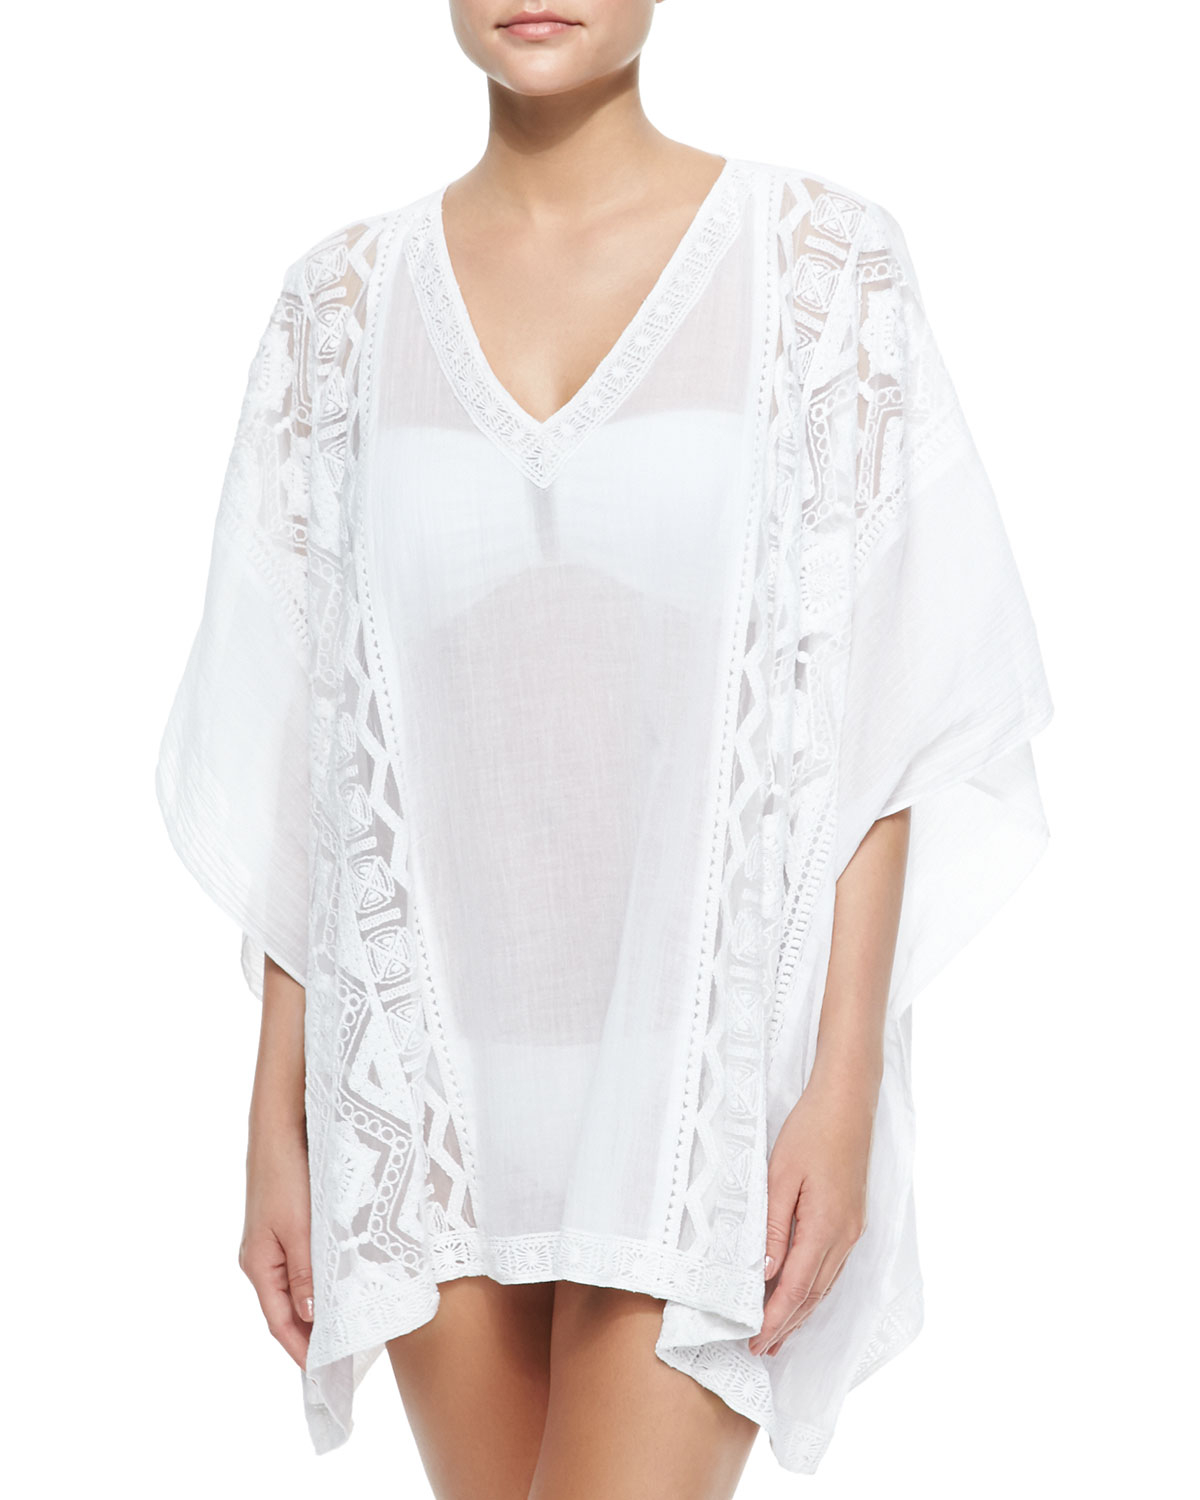 Ondademar Lace-Trim Voile Caftan Coverup in White | Lyst